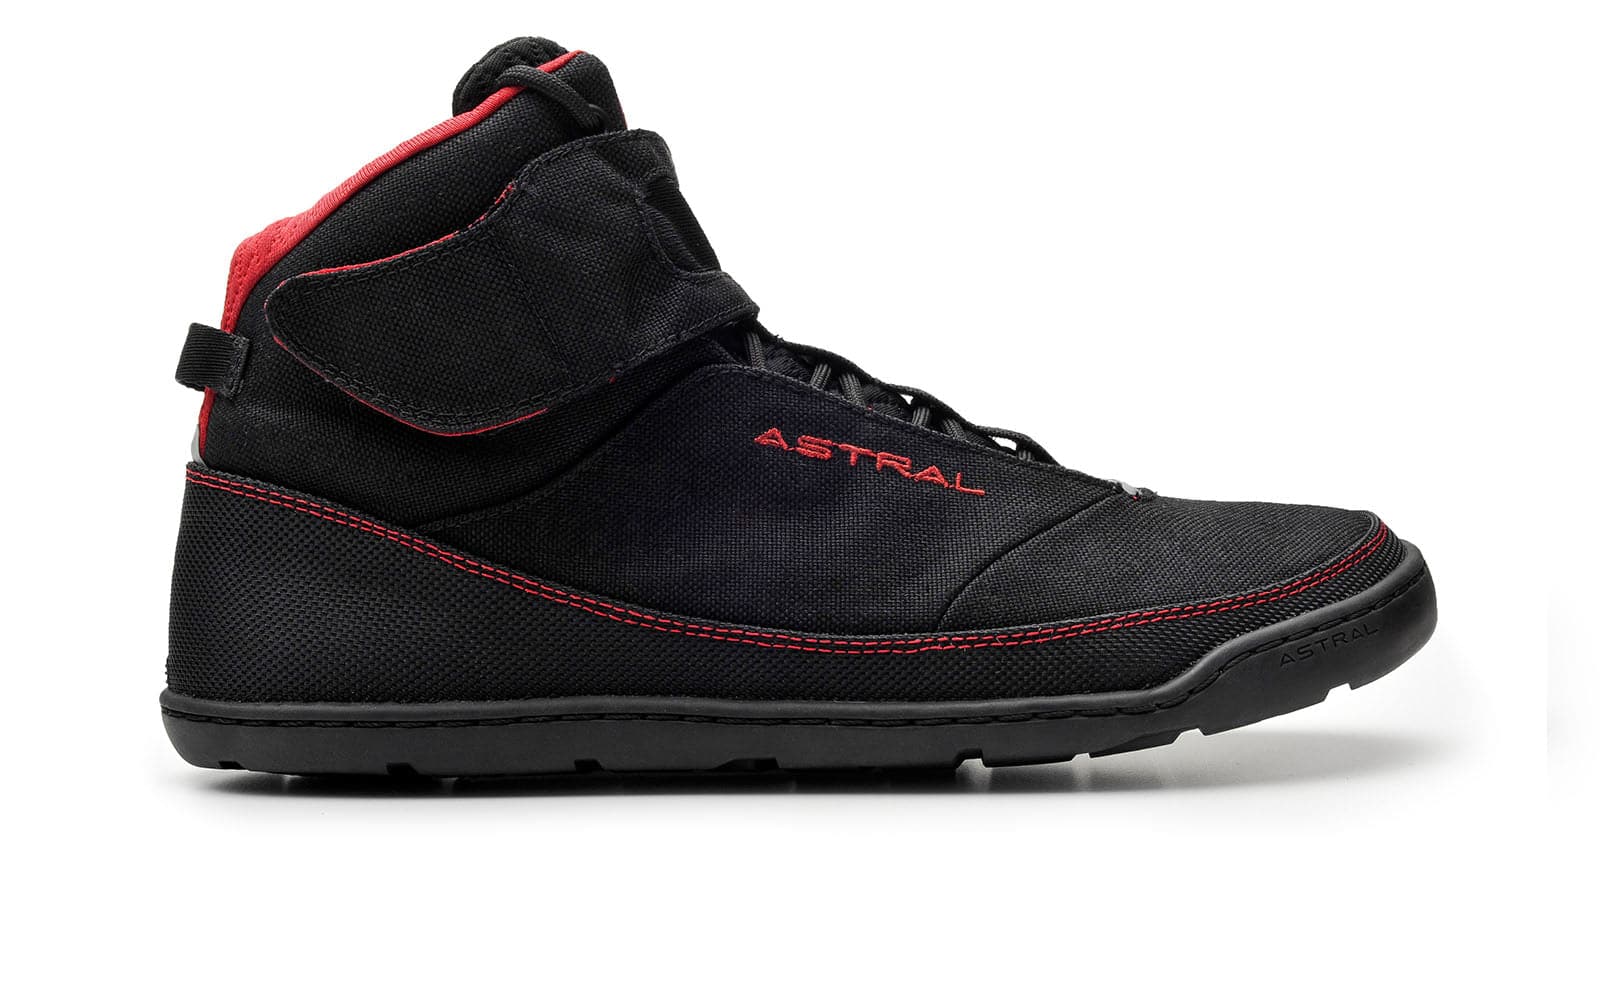 Featuring the Hiyak men's footwear, water shoe, women's footwear manufactured by Astral shown here from one angle.